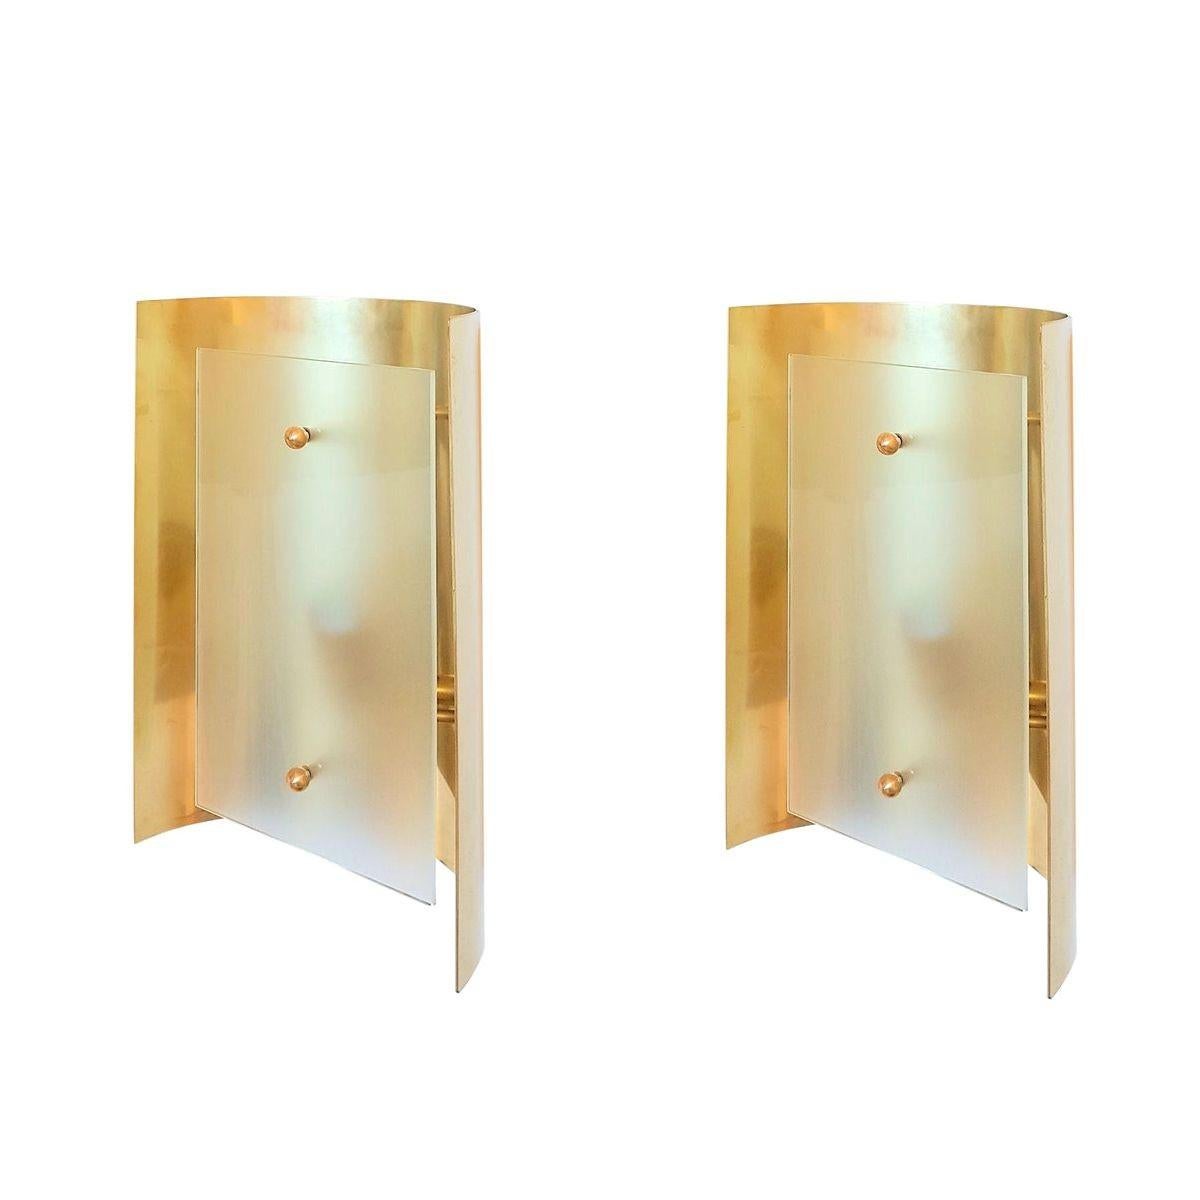 Pair of polished brass and frosted glass wall sconces or flush mounts, Italy 1970s.
Attributed to Sciolari.
1 light each. Professionally rewired for the US.
Mid century modern style pair of sconces.
Hand crafted by Italian artisans..
Matching